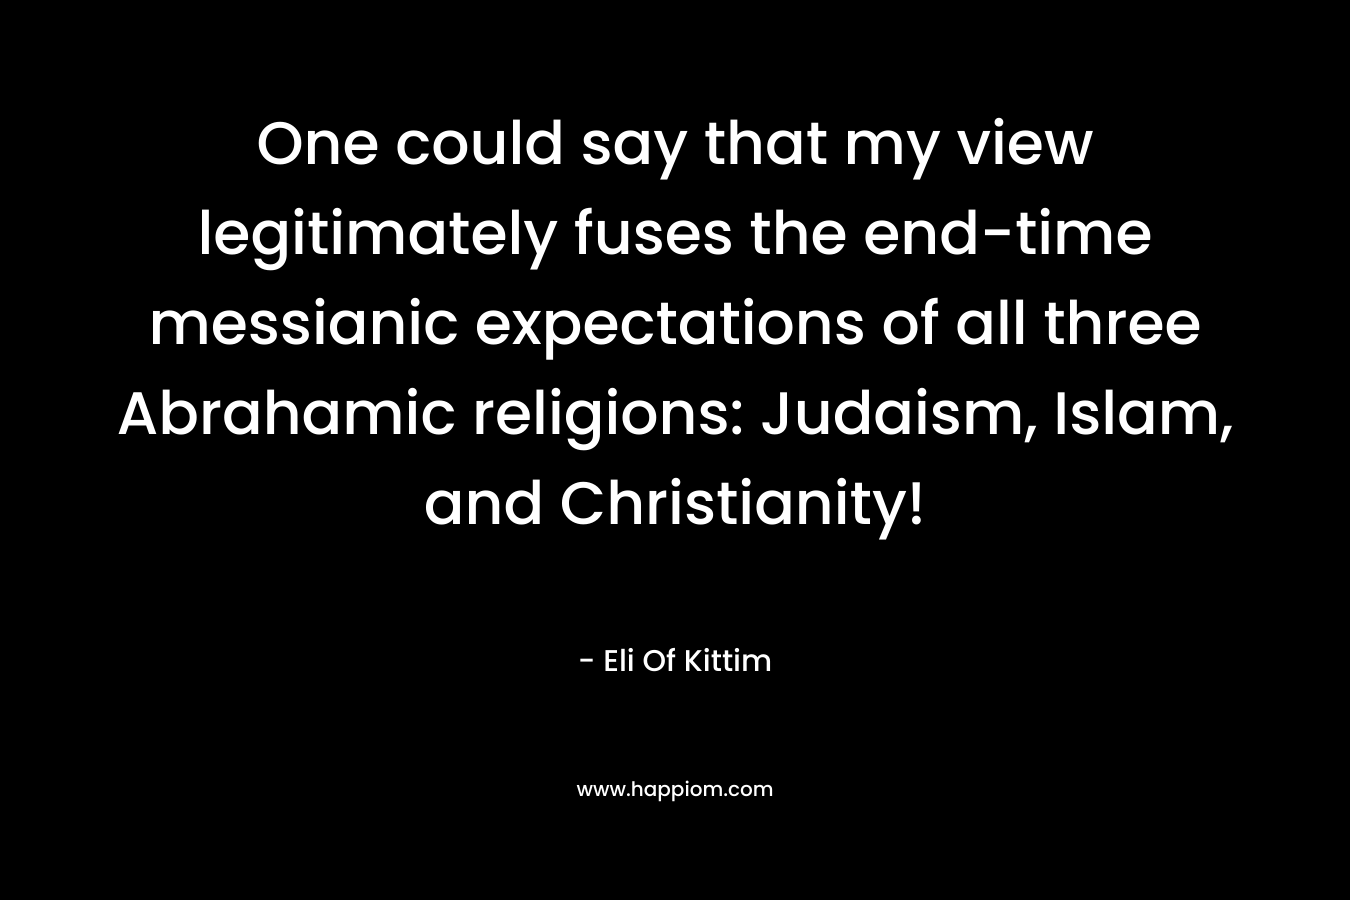 One could say that my view legitimately fuses the end-time messianic expectations of all three Abrahamic religions: Judaism, Islam, and Christianity! – Eli Of Kittim